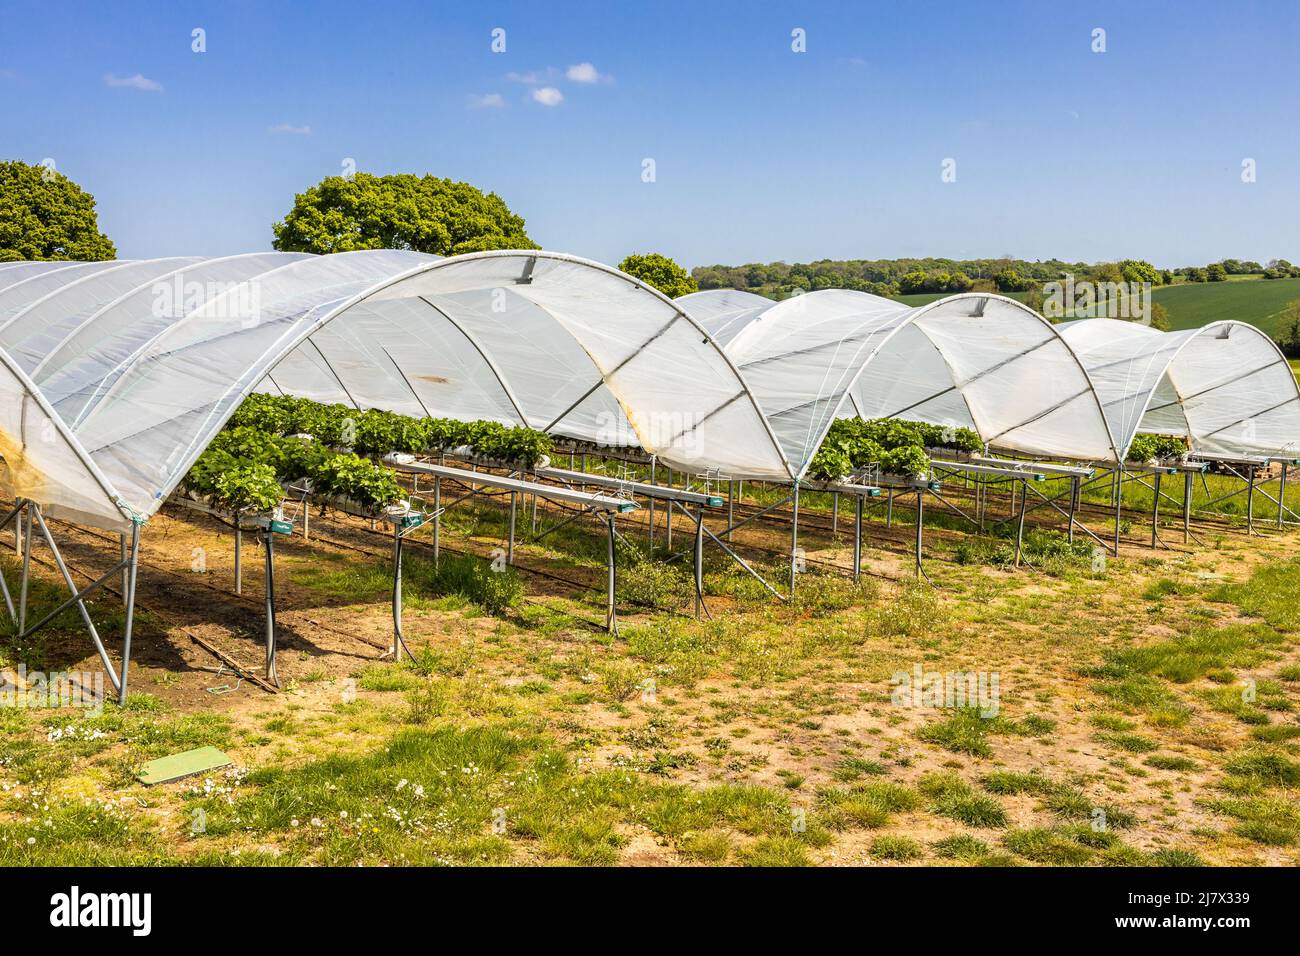 Strawberries and raspberries growing in polytunnels or hoop houses for protection for the coming pick your own fruit season Stock Photo